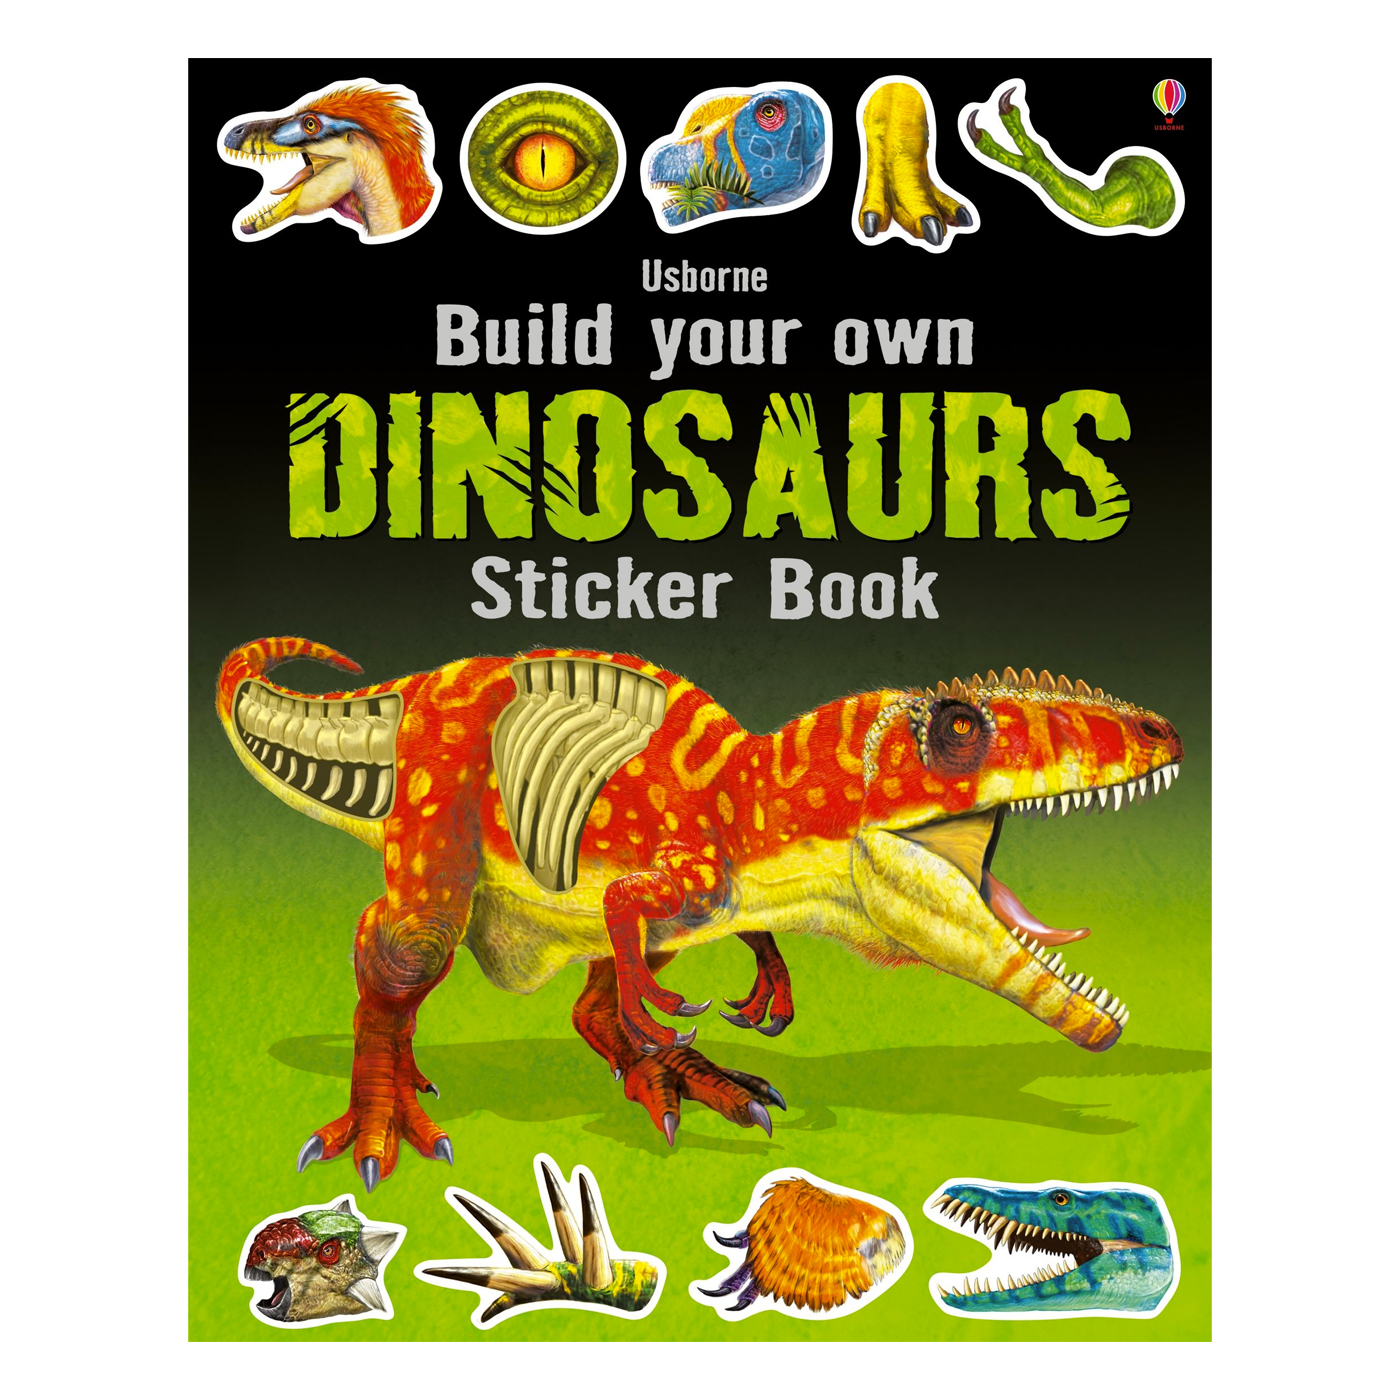  Build Your Own Dinosaurs Sticker